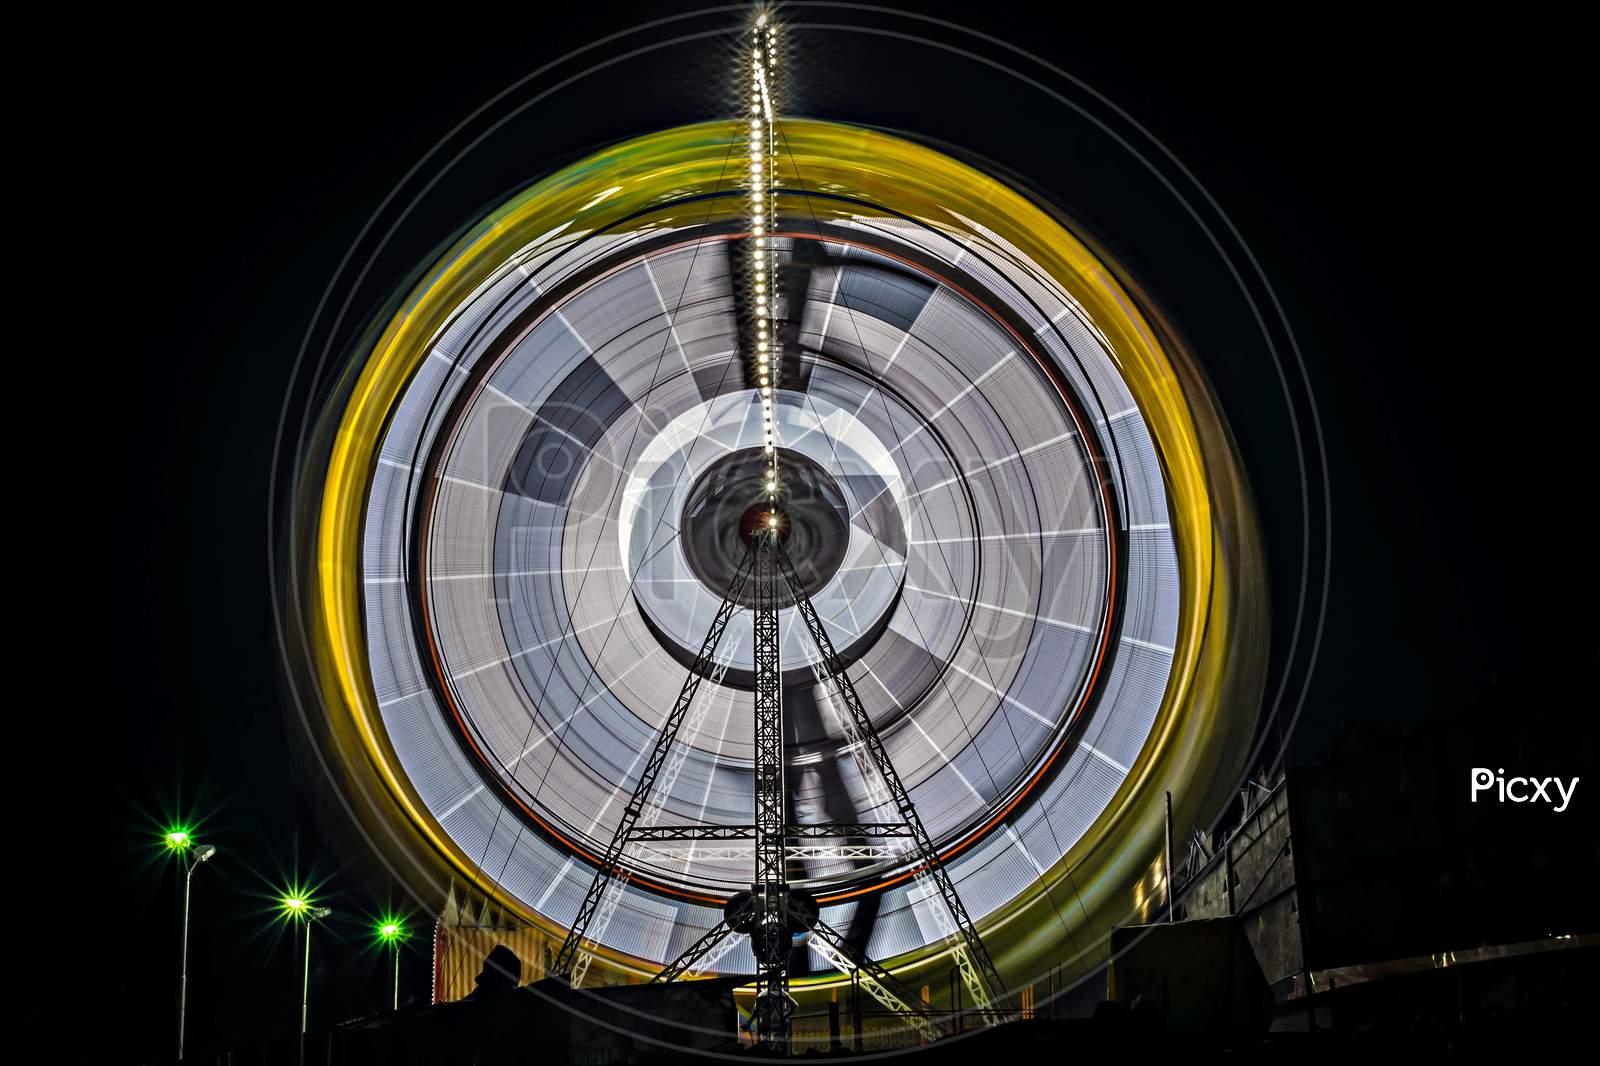 Slow Shutter, Night Image Of A Spinning Giant Wheel In Funfair In Pune.